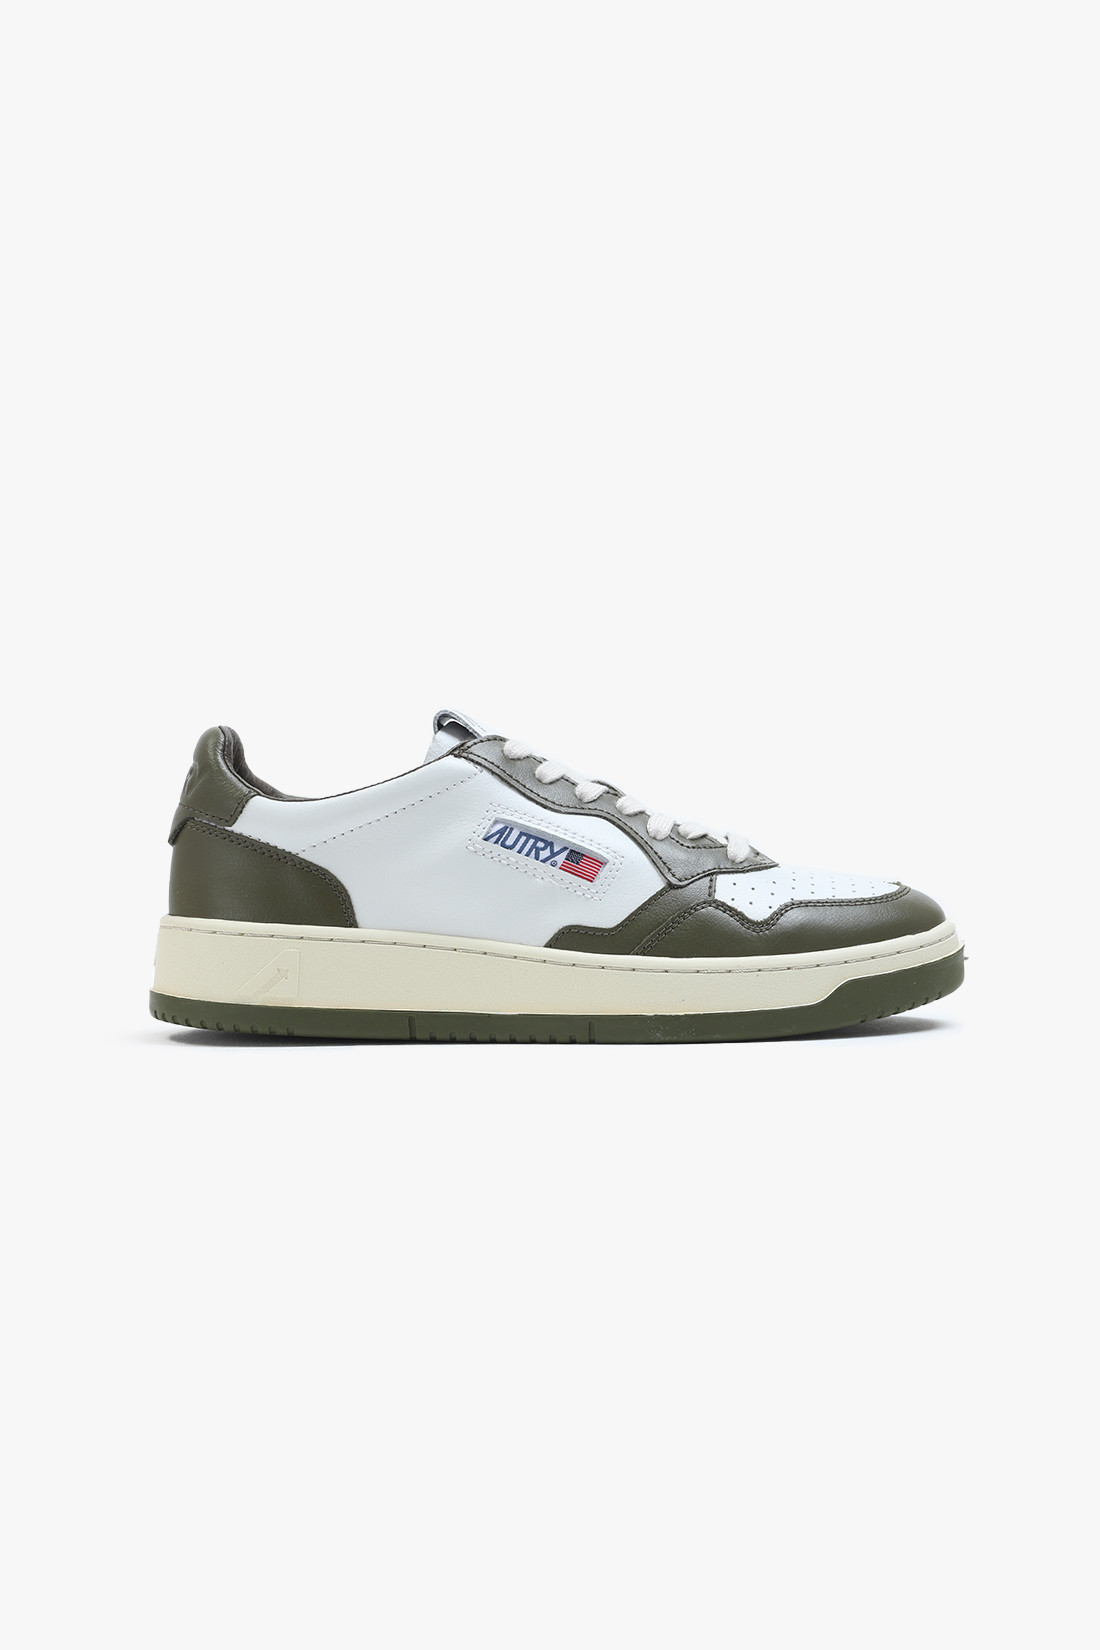 Autry wb33 White/ olive